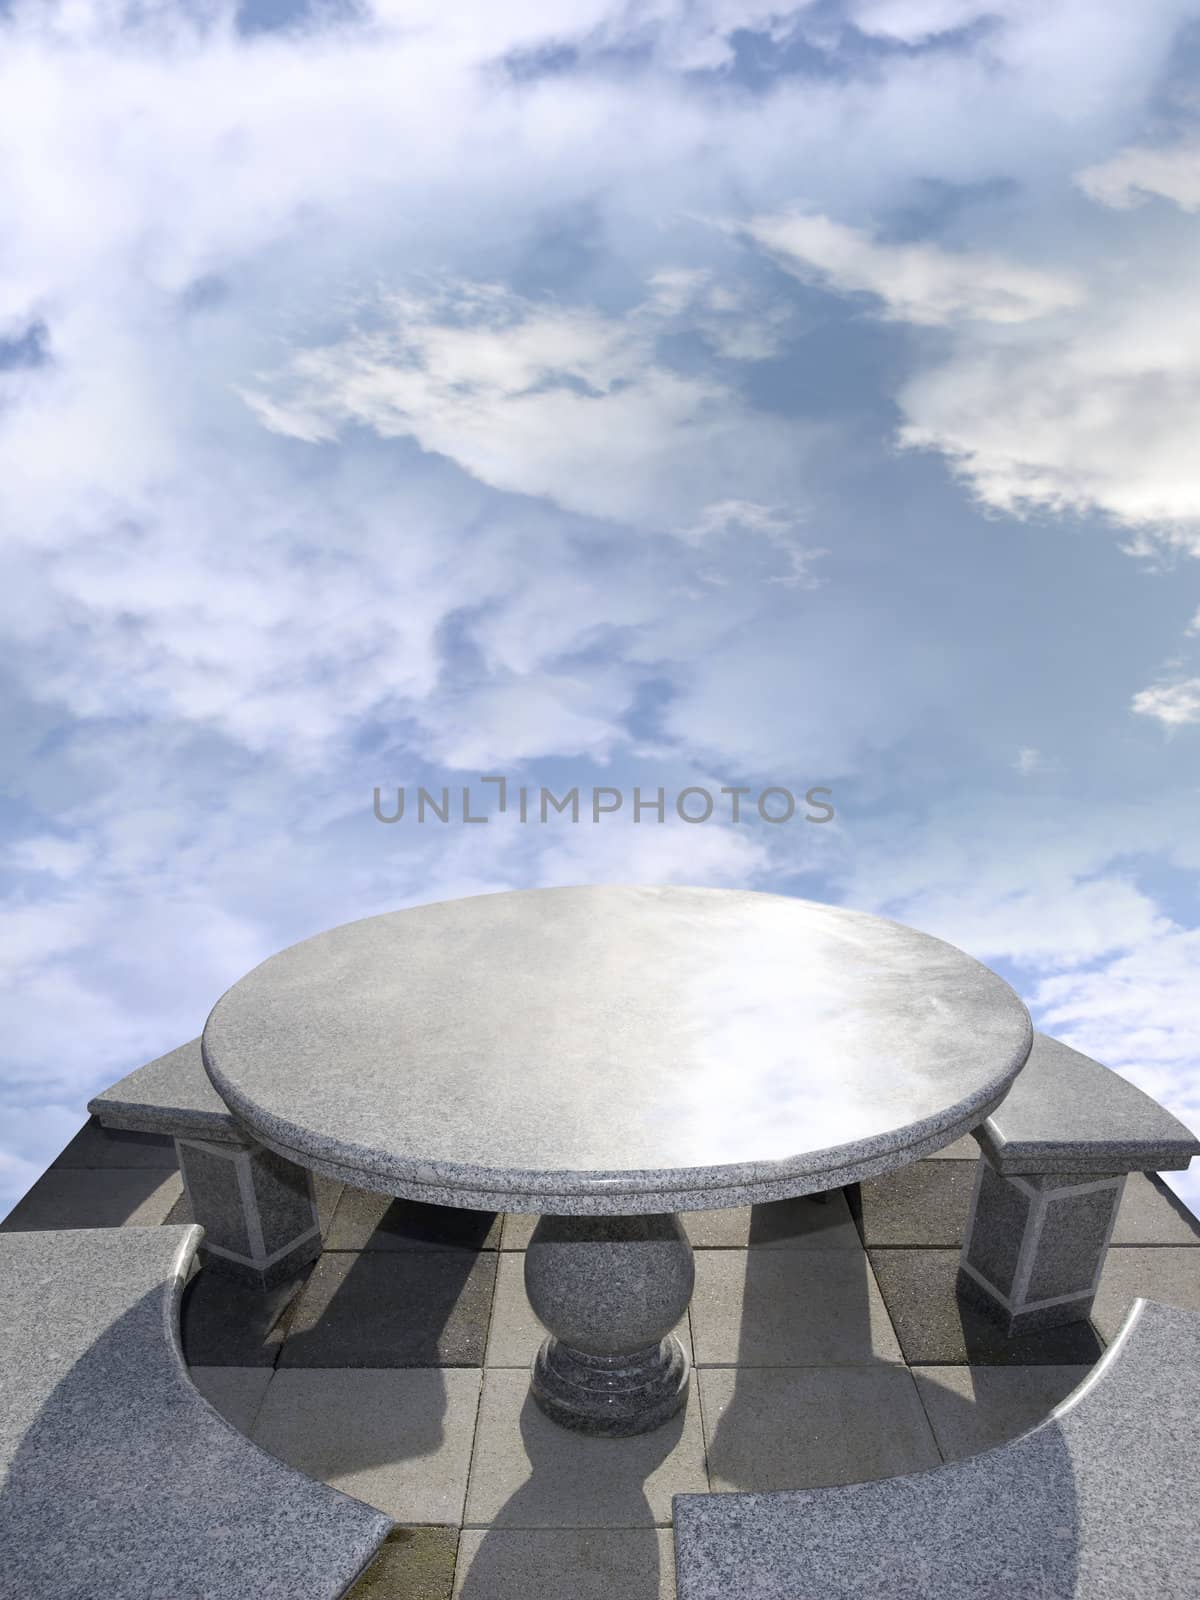 large marble table and chairs against a bright blue cloudy background